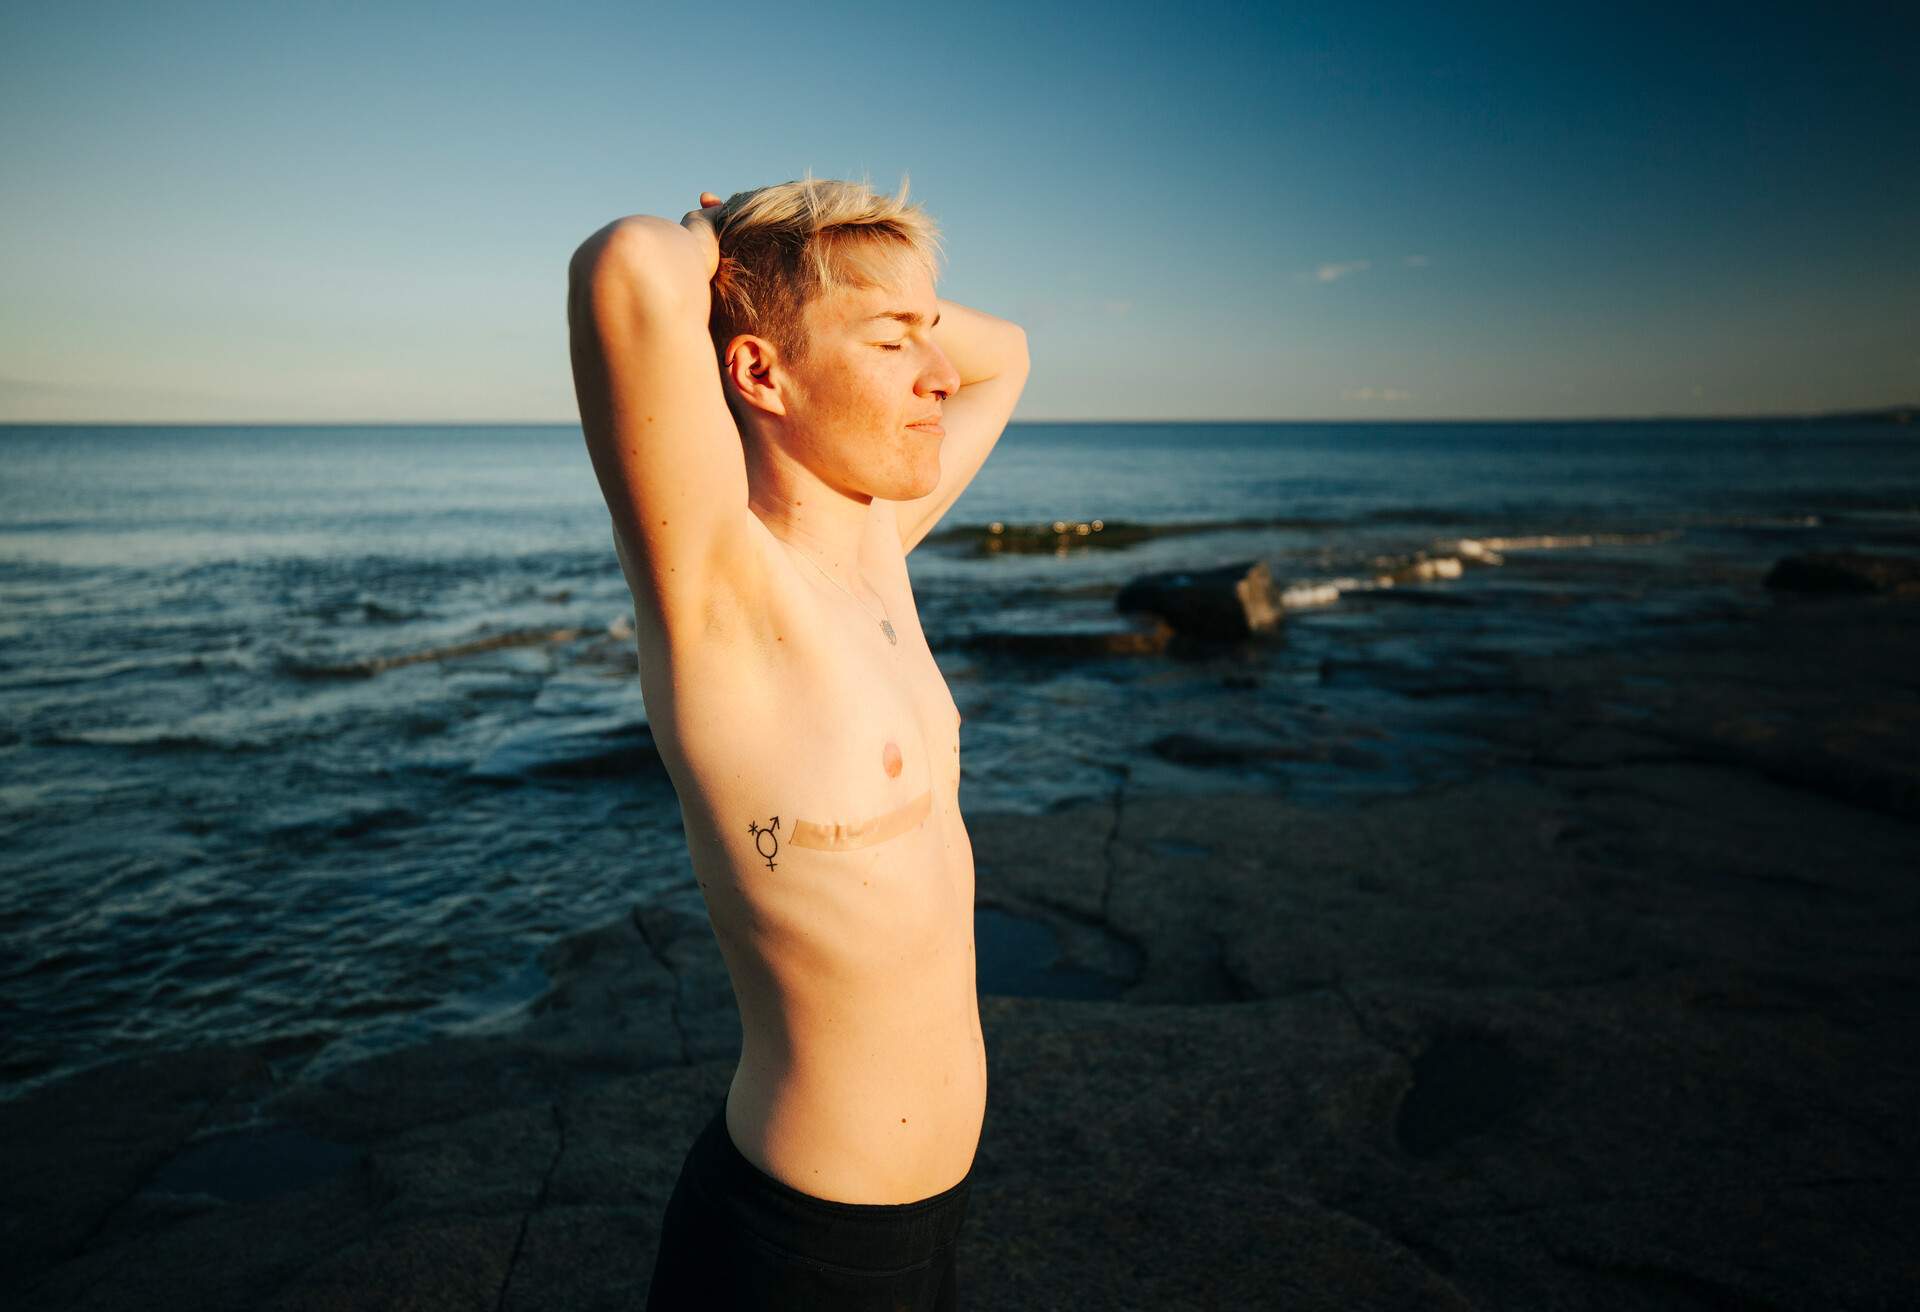 THEME_PEOPLE_TRASNGENDER_NON-BINARY_PERSON_BEACH_GettyImages-1383933237